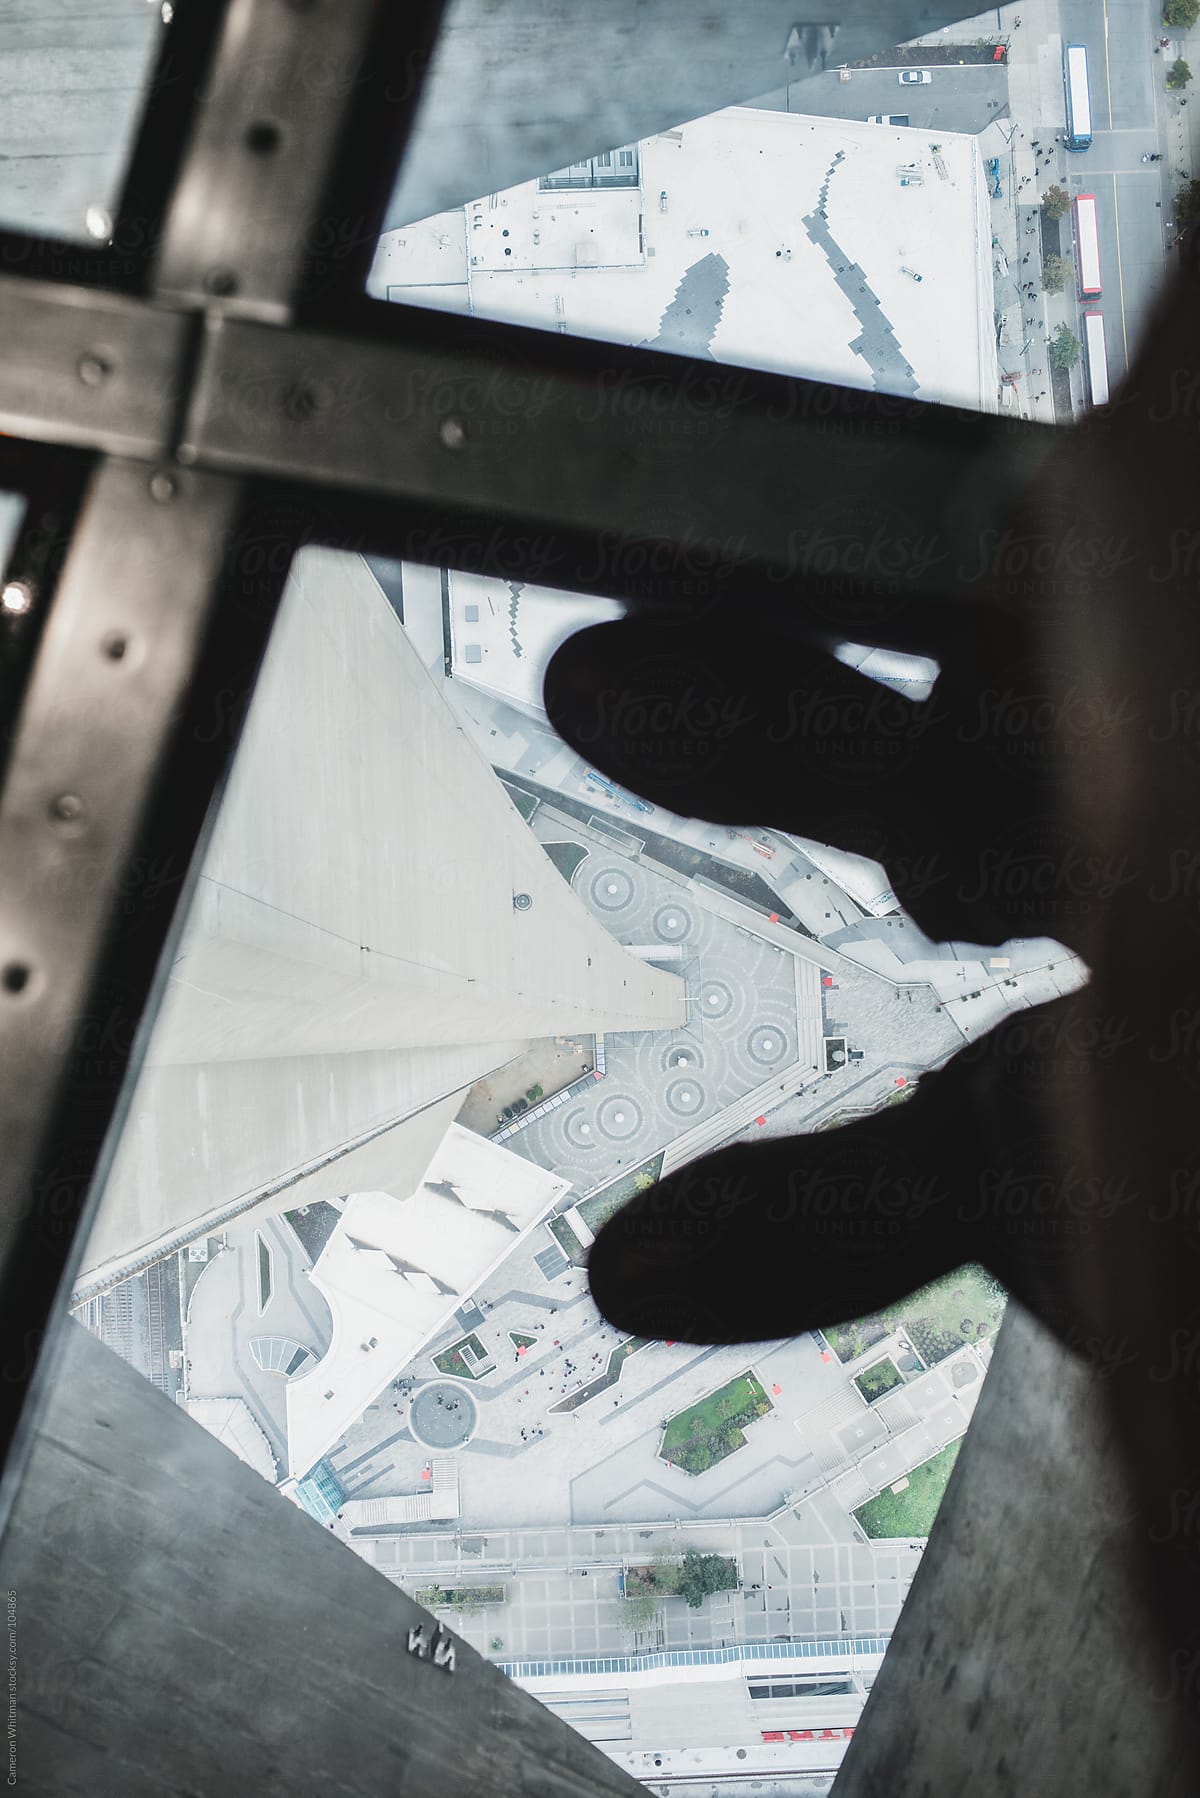 Looking down throught the glass floor in the CN tower